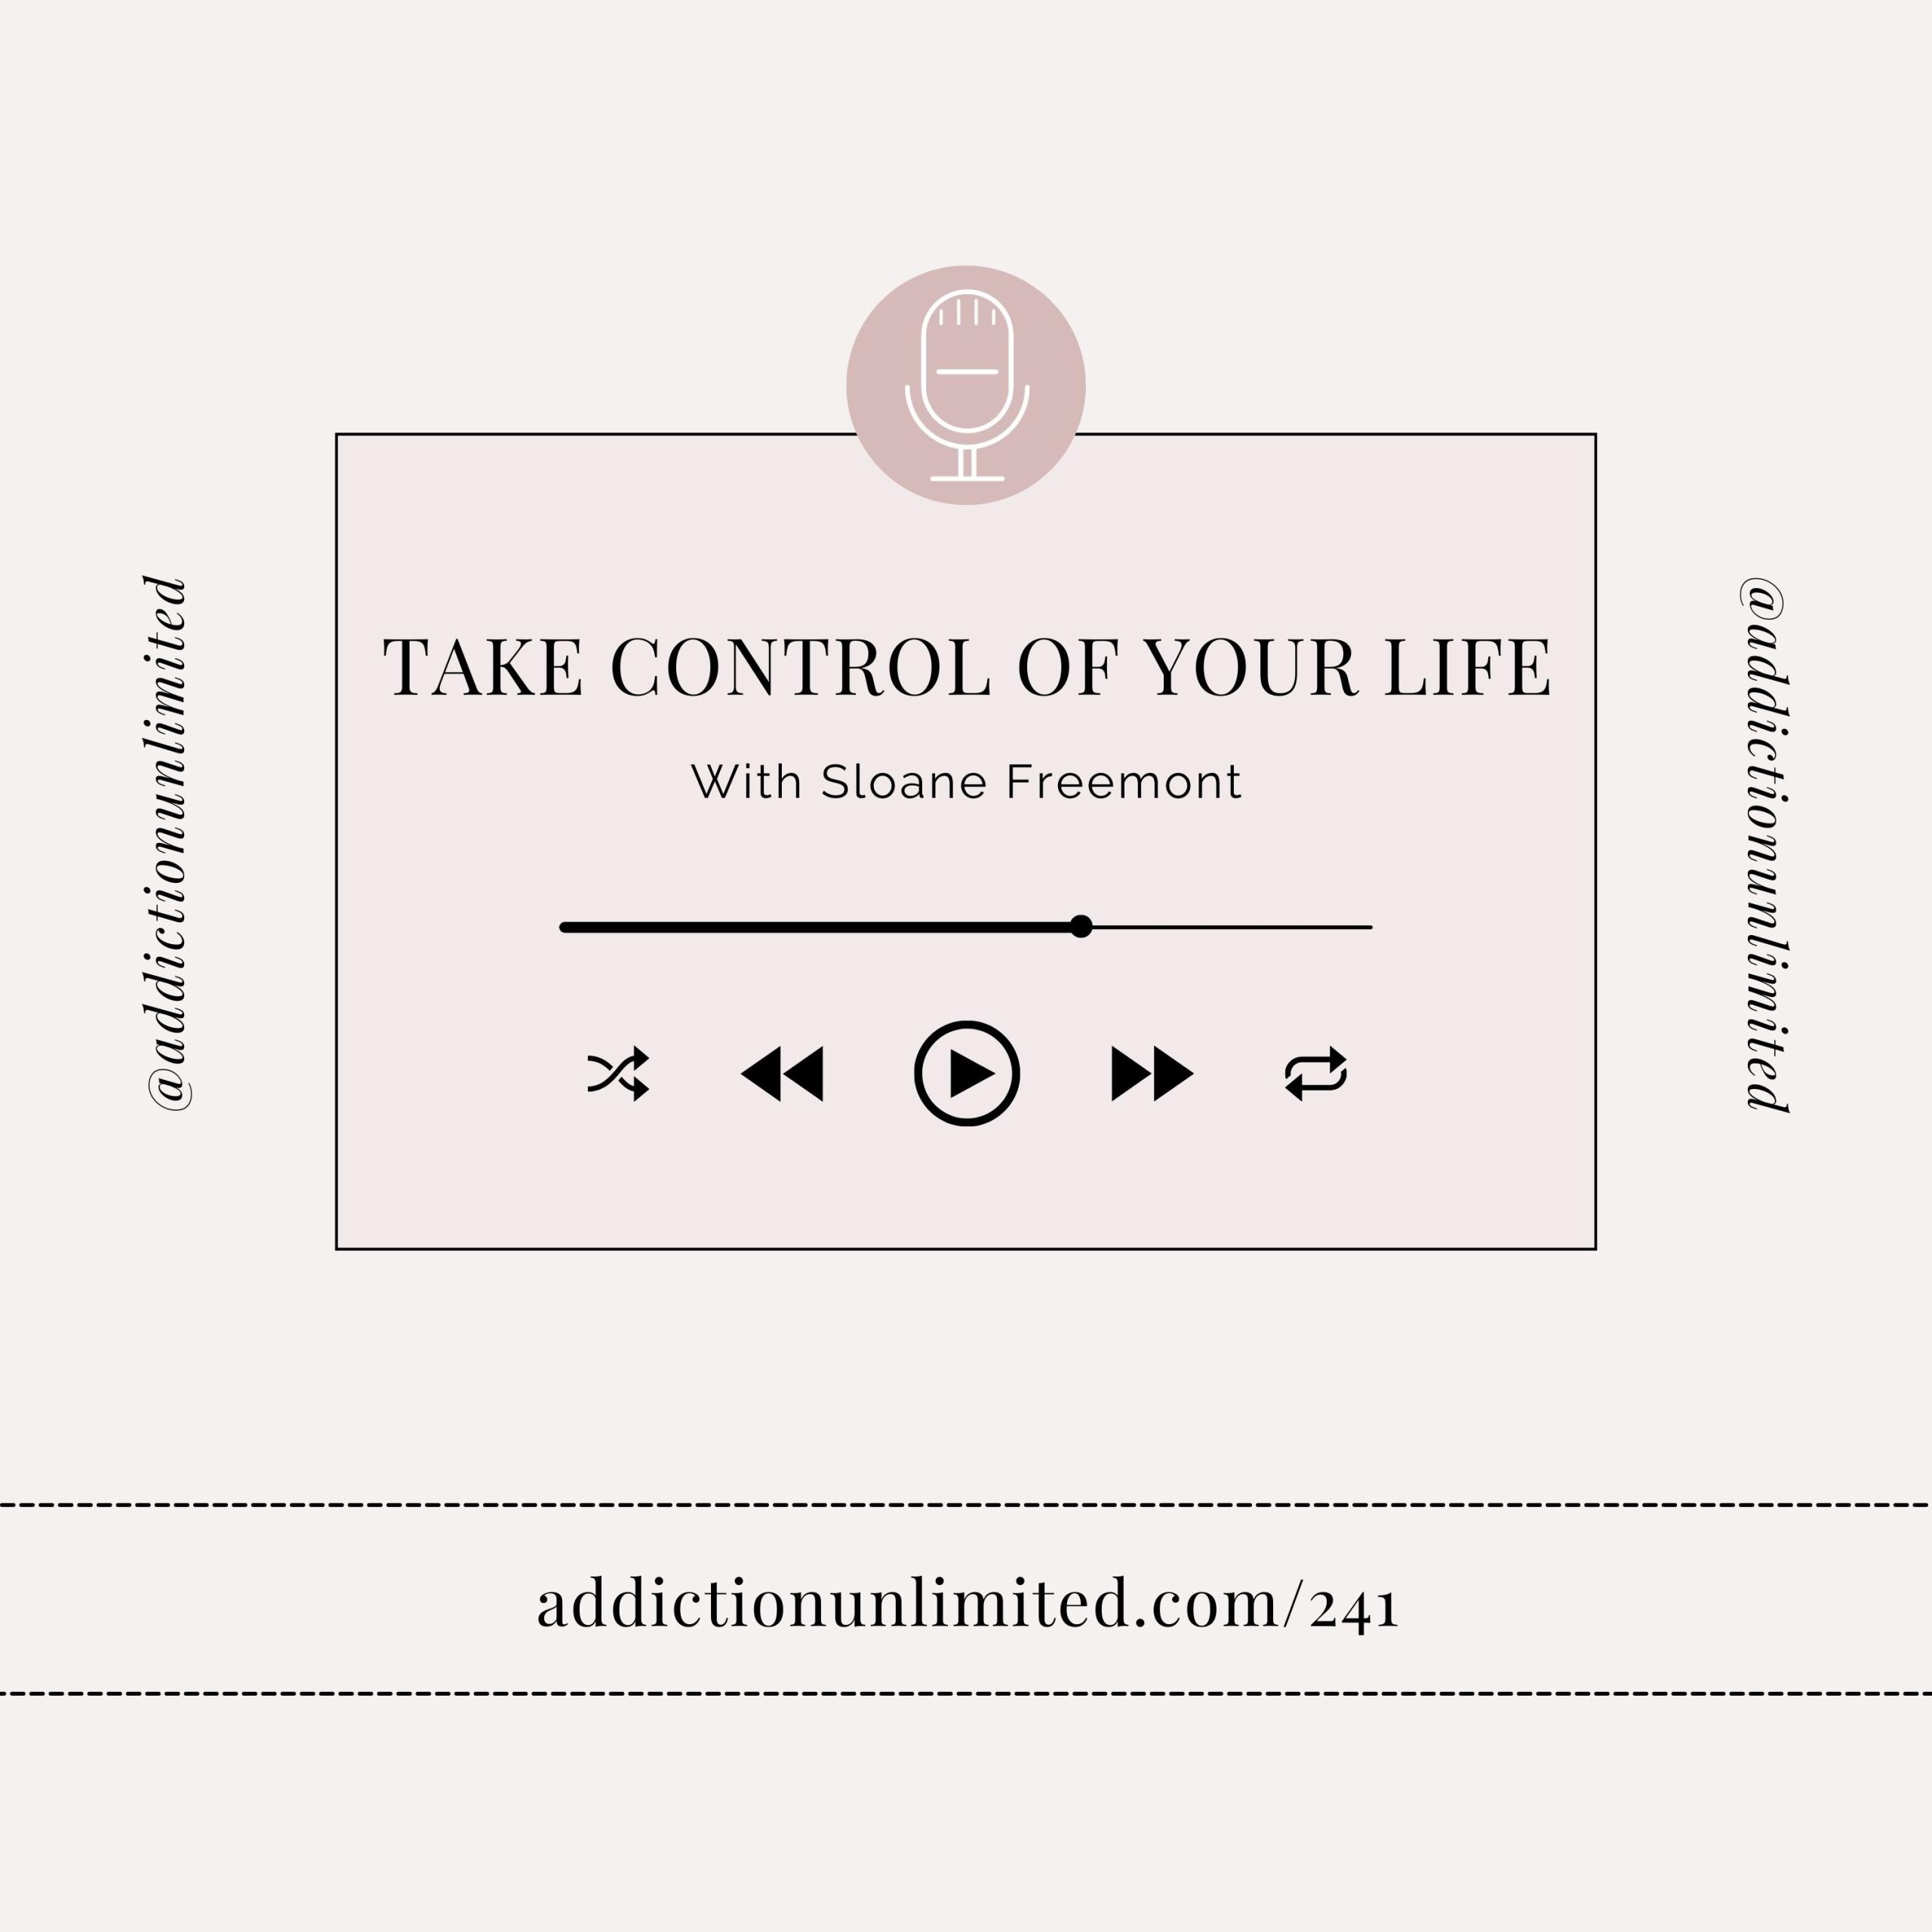 Take Control of Your Life with Sloane Freemont